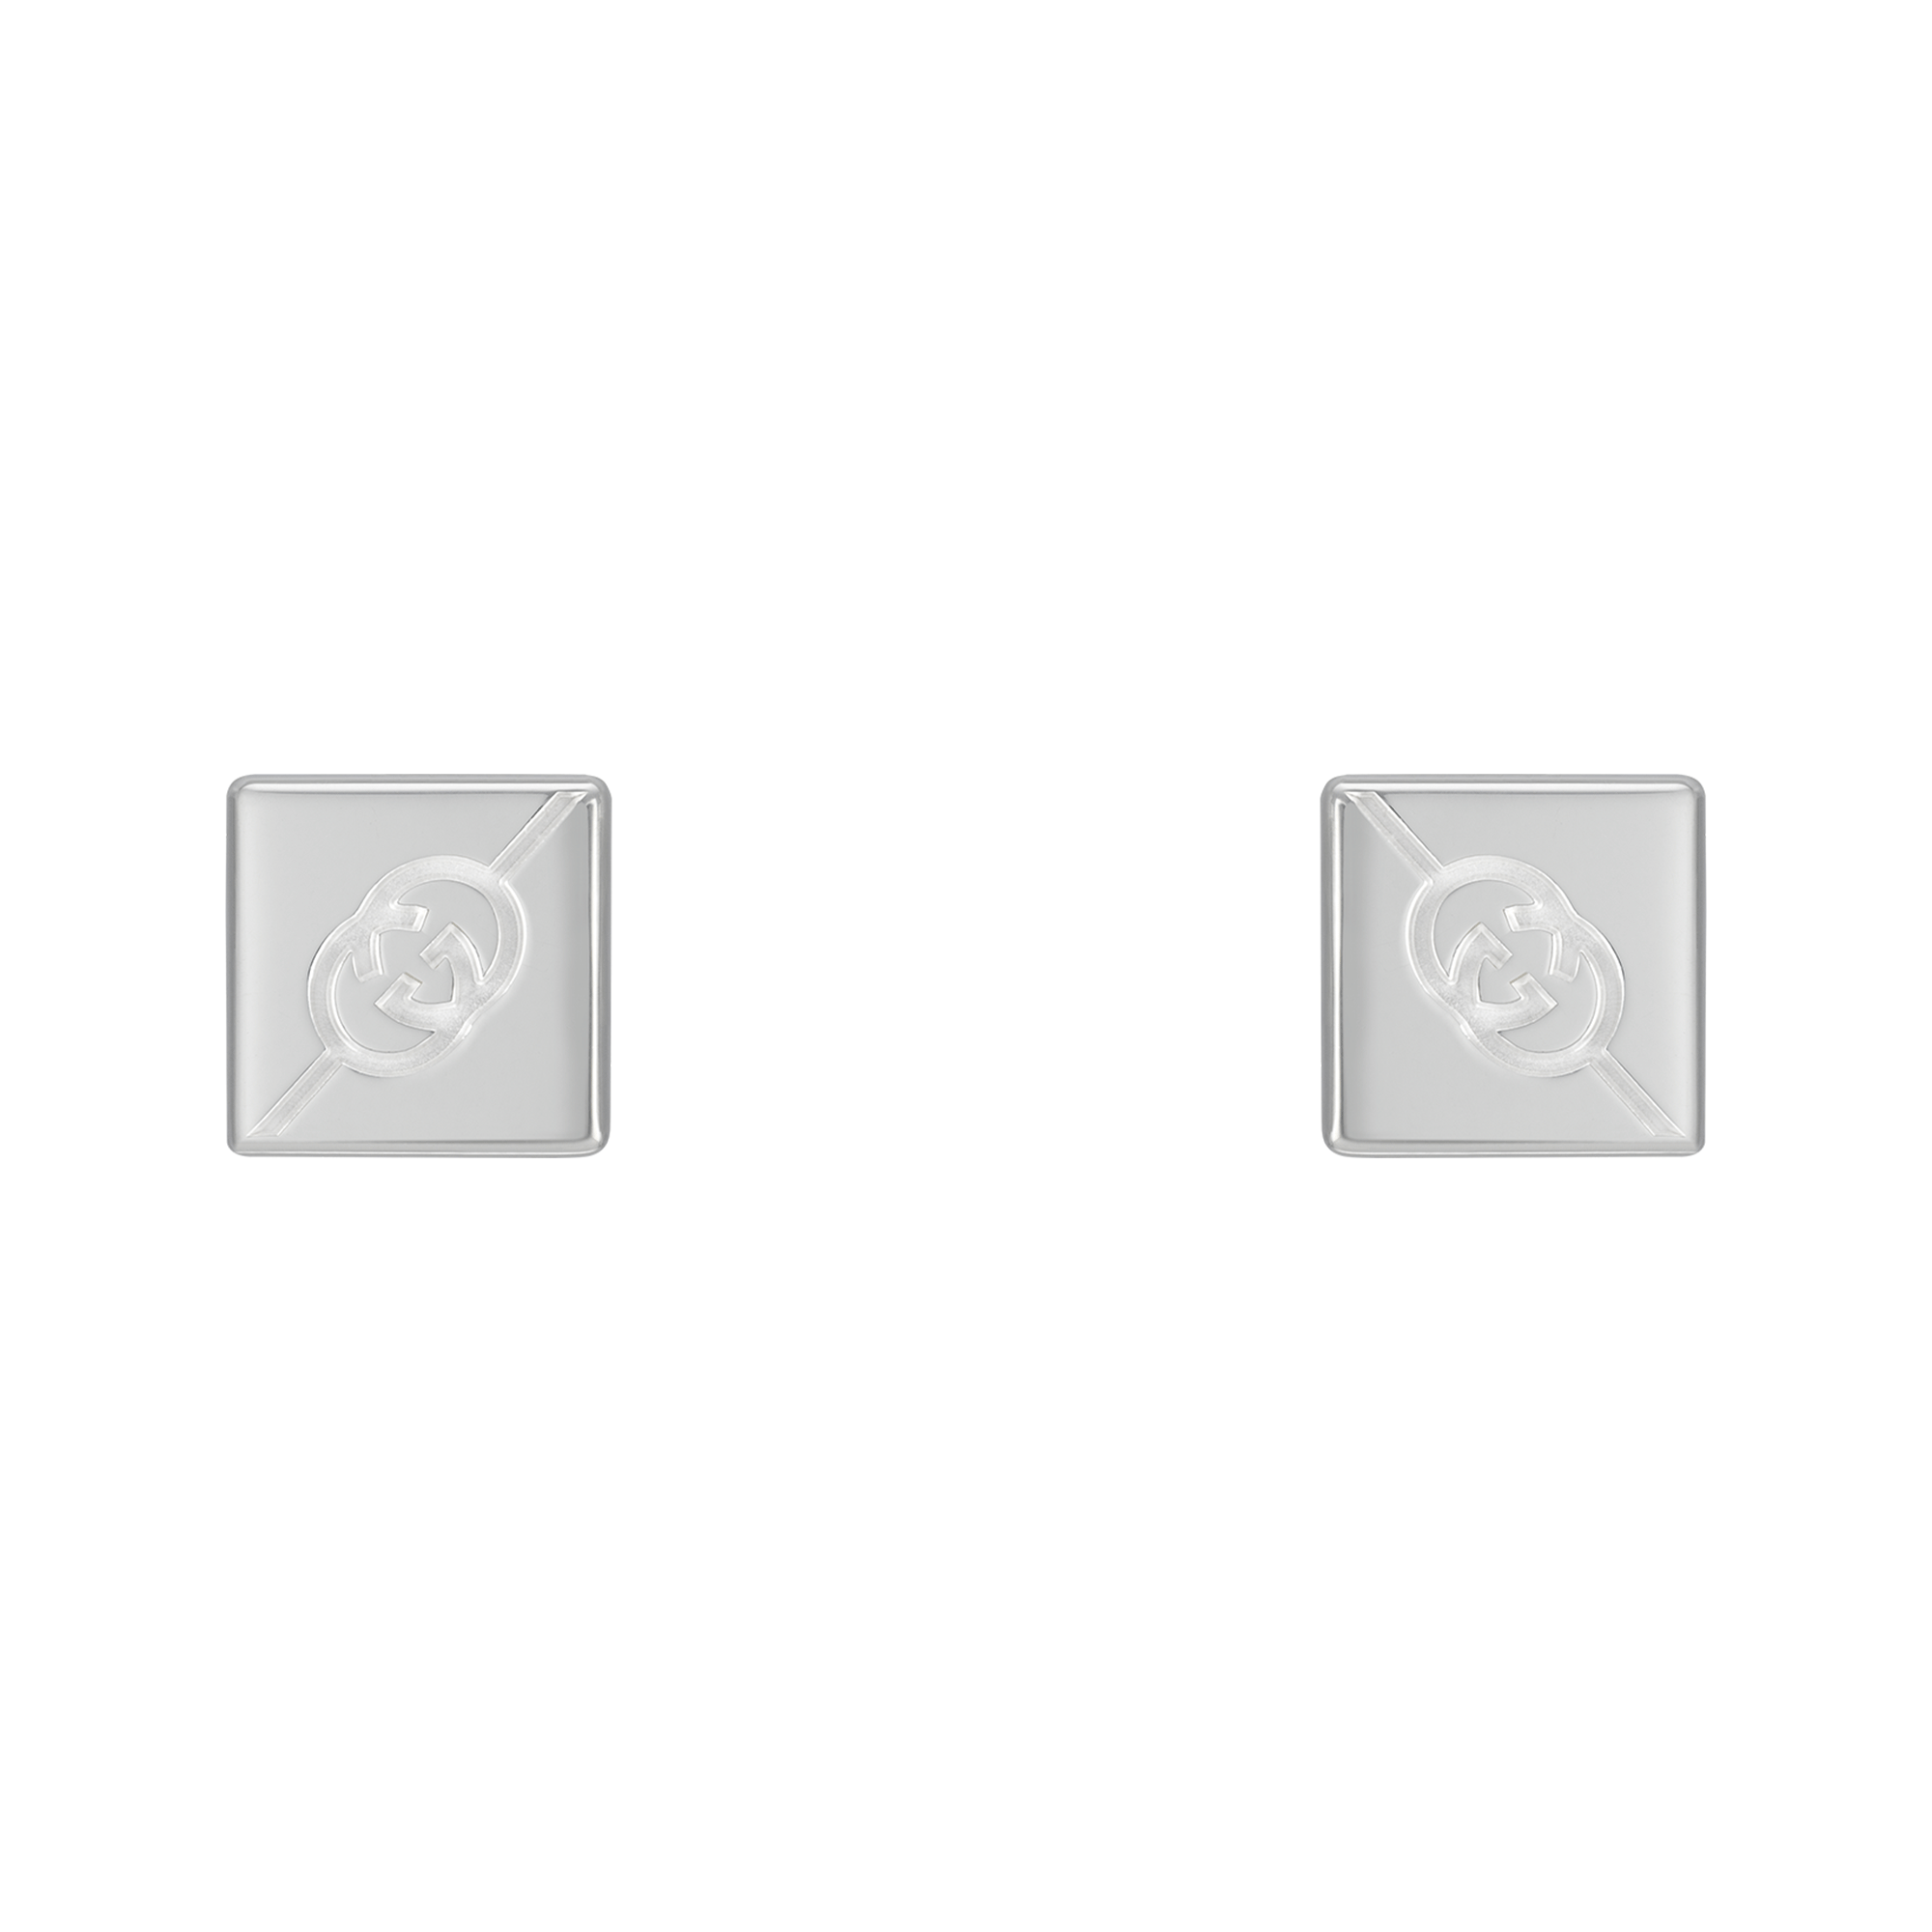 Tag Sterling Silver Square Stud Earrings